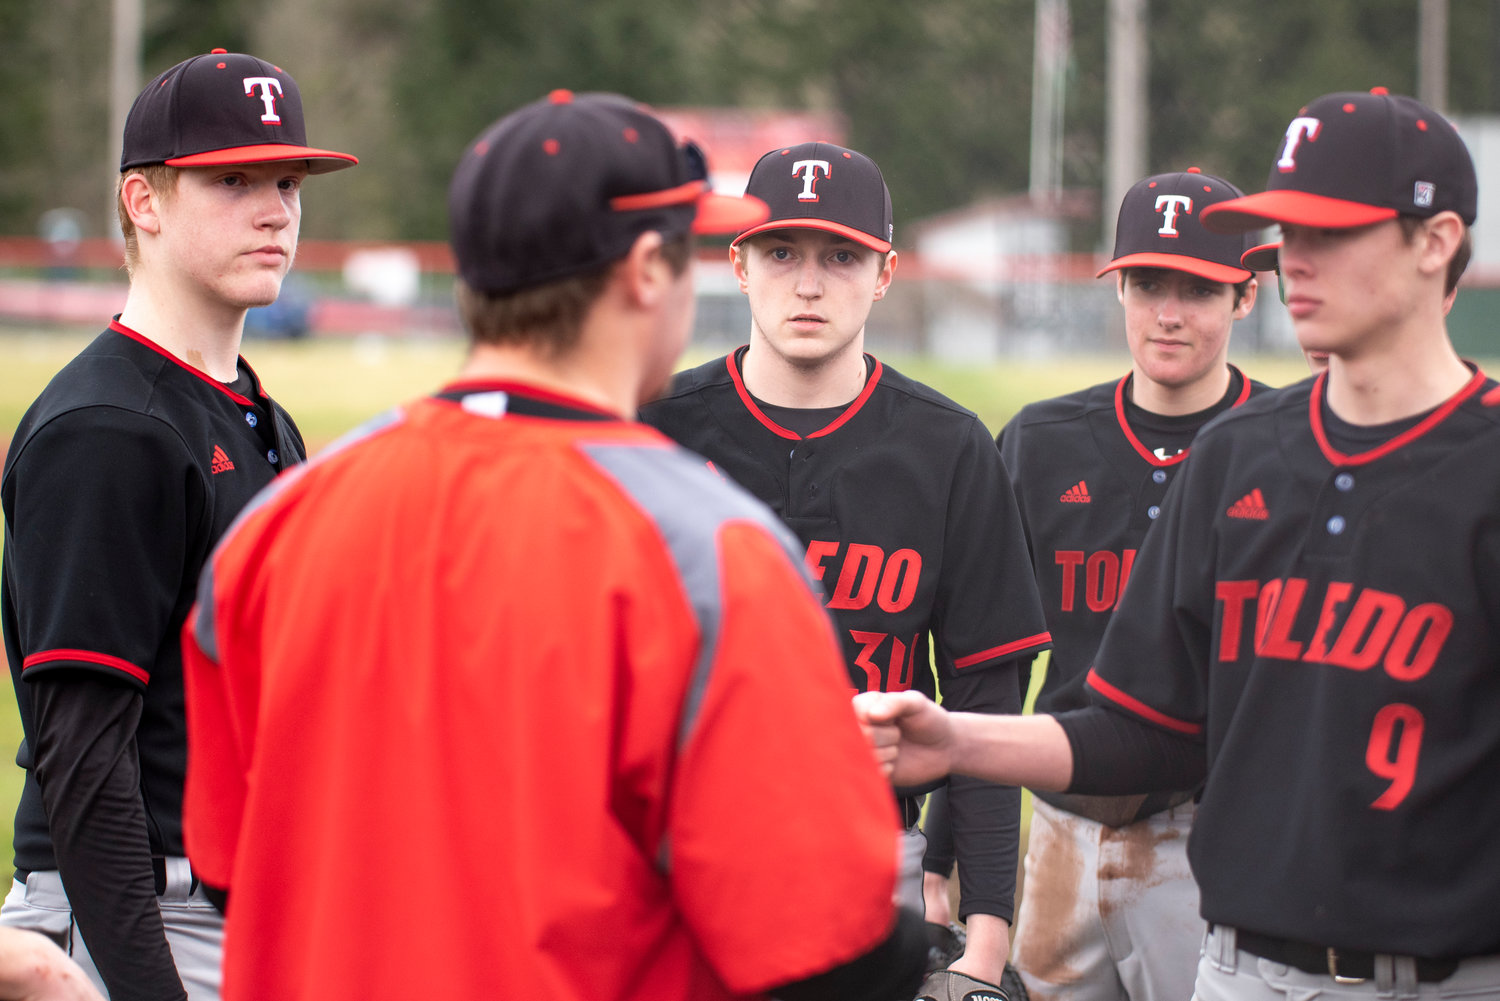 Toledo baseball coach Mck Gaul, foreground, talks to his team between innings during a road game at Tenino on March 16.